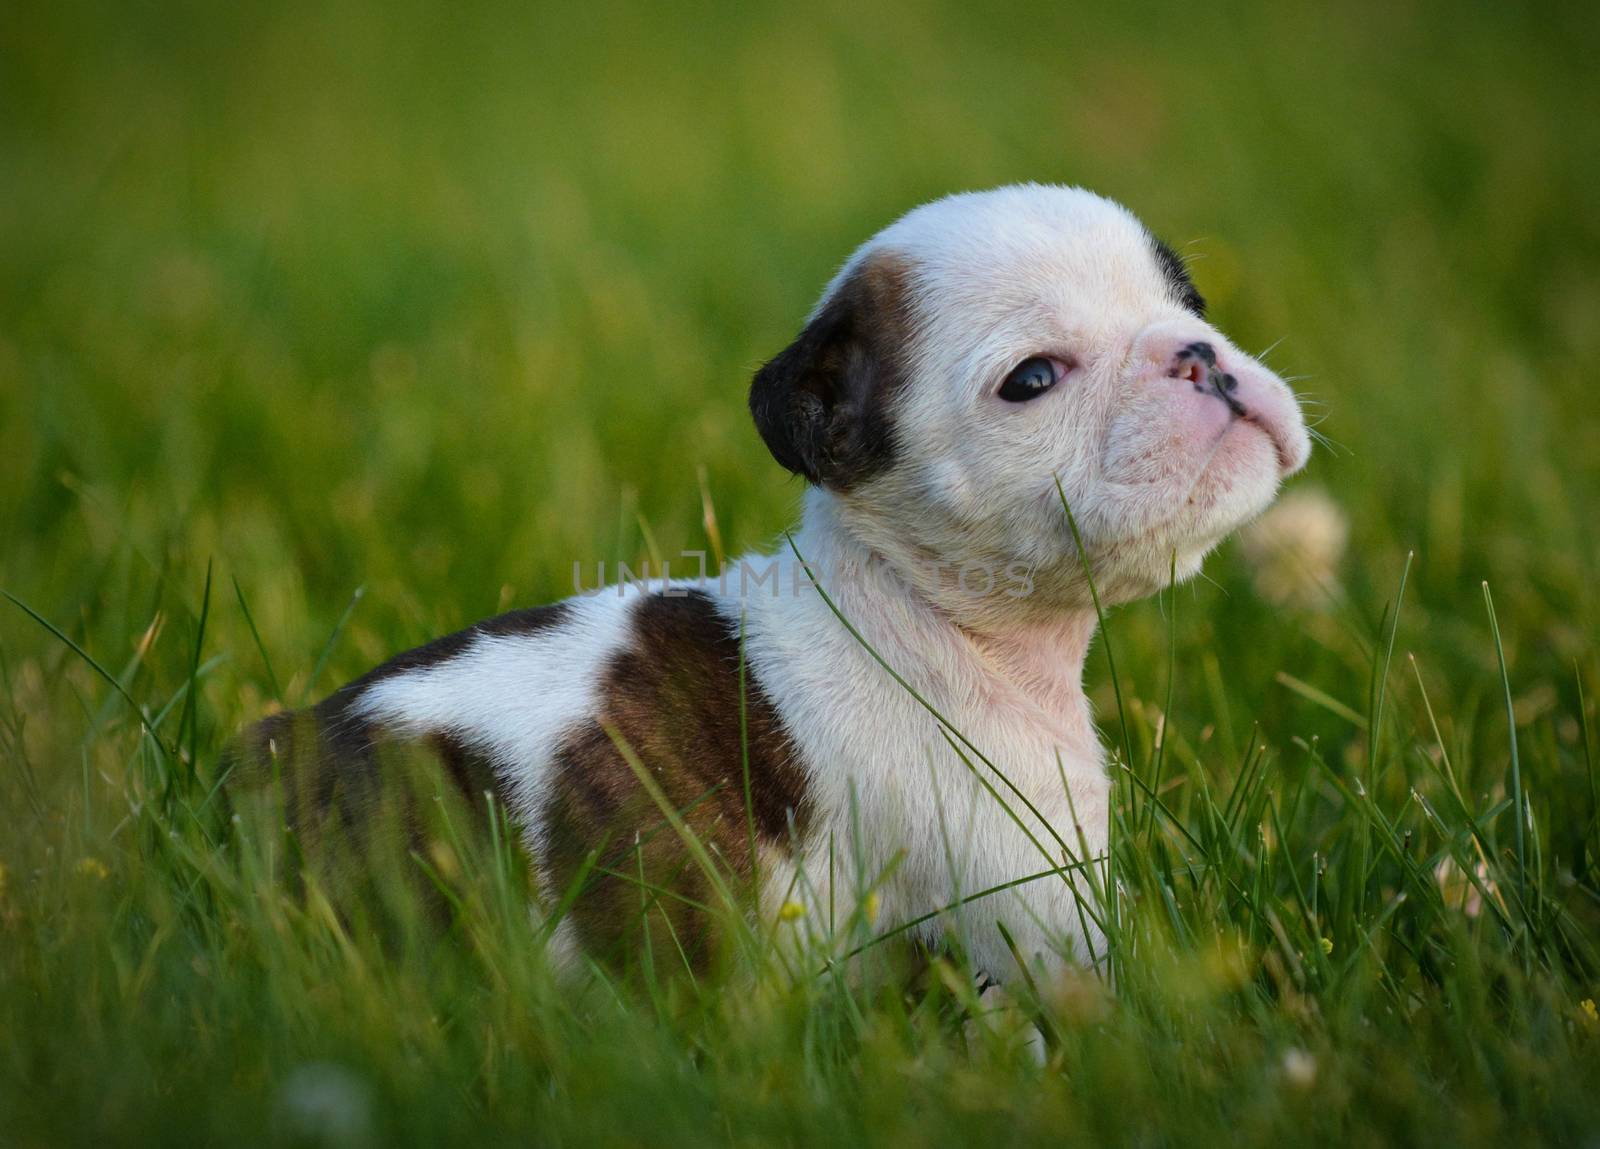 puppy in the grass by willeecole123